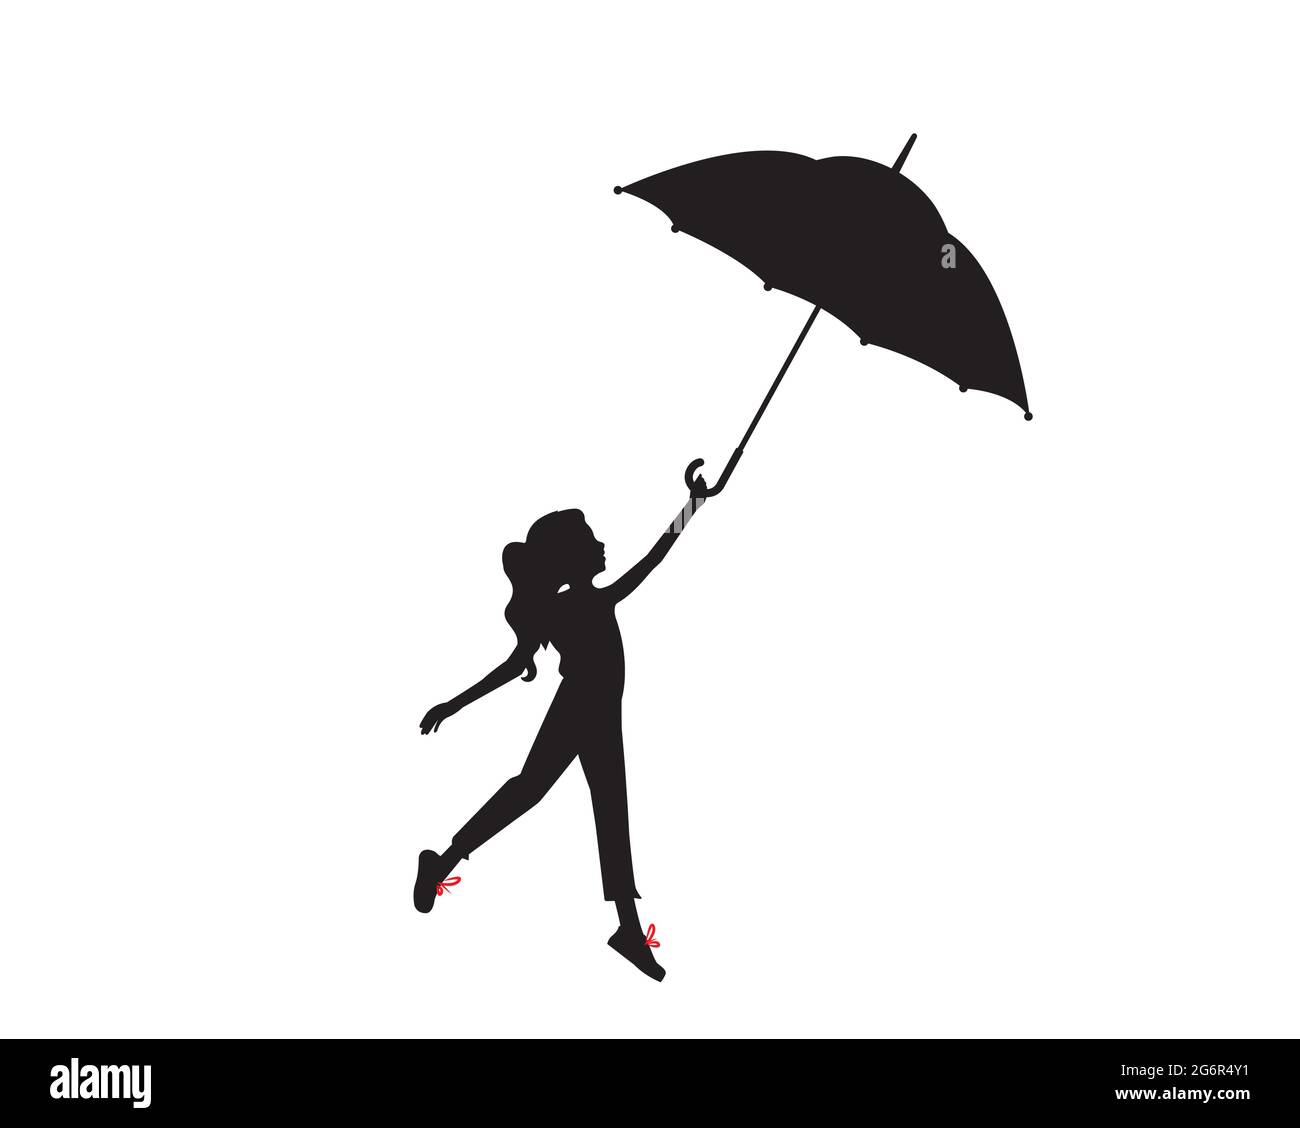 Girl silhouette holding umbrella, vector, poster design isolated on white background, wall art work, wall decals, wall decoration Stock Vector